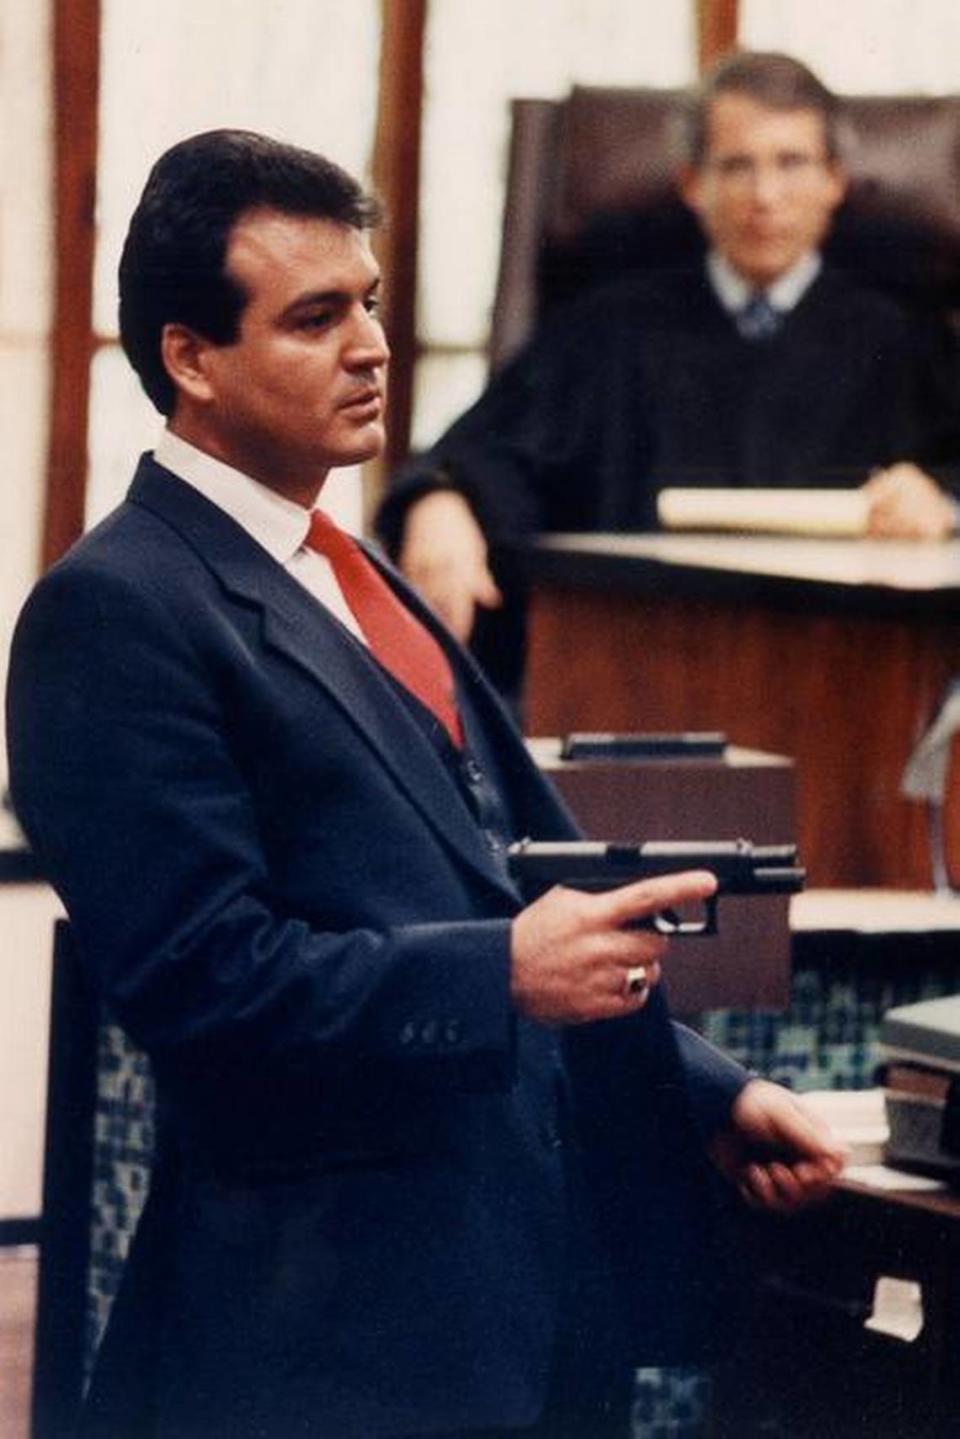 Miami Police Officer William Lozano testifies at his 1989 manslaughter trial for shooting motorcyclist Clement Lloyd. Lloyd and his passenger Allan Blanchard were both killed. Lozano was the last officer in Florida convicted in a police shooting but the verdict was later overturned.